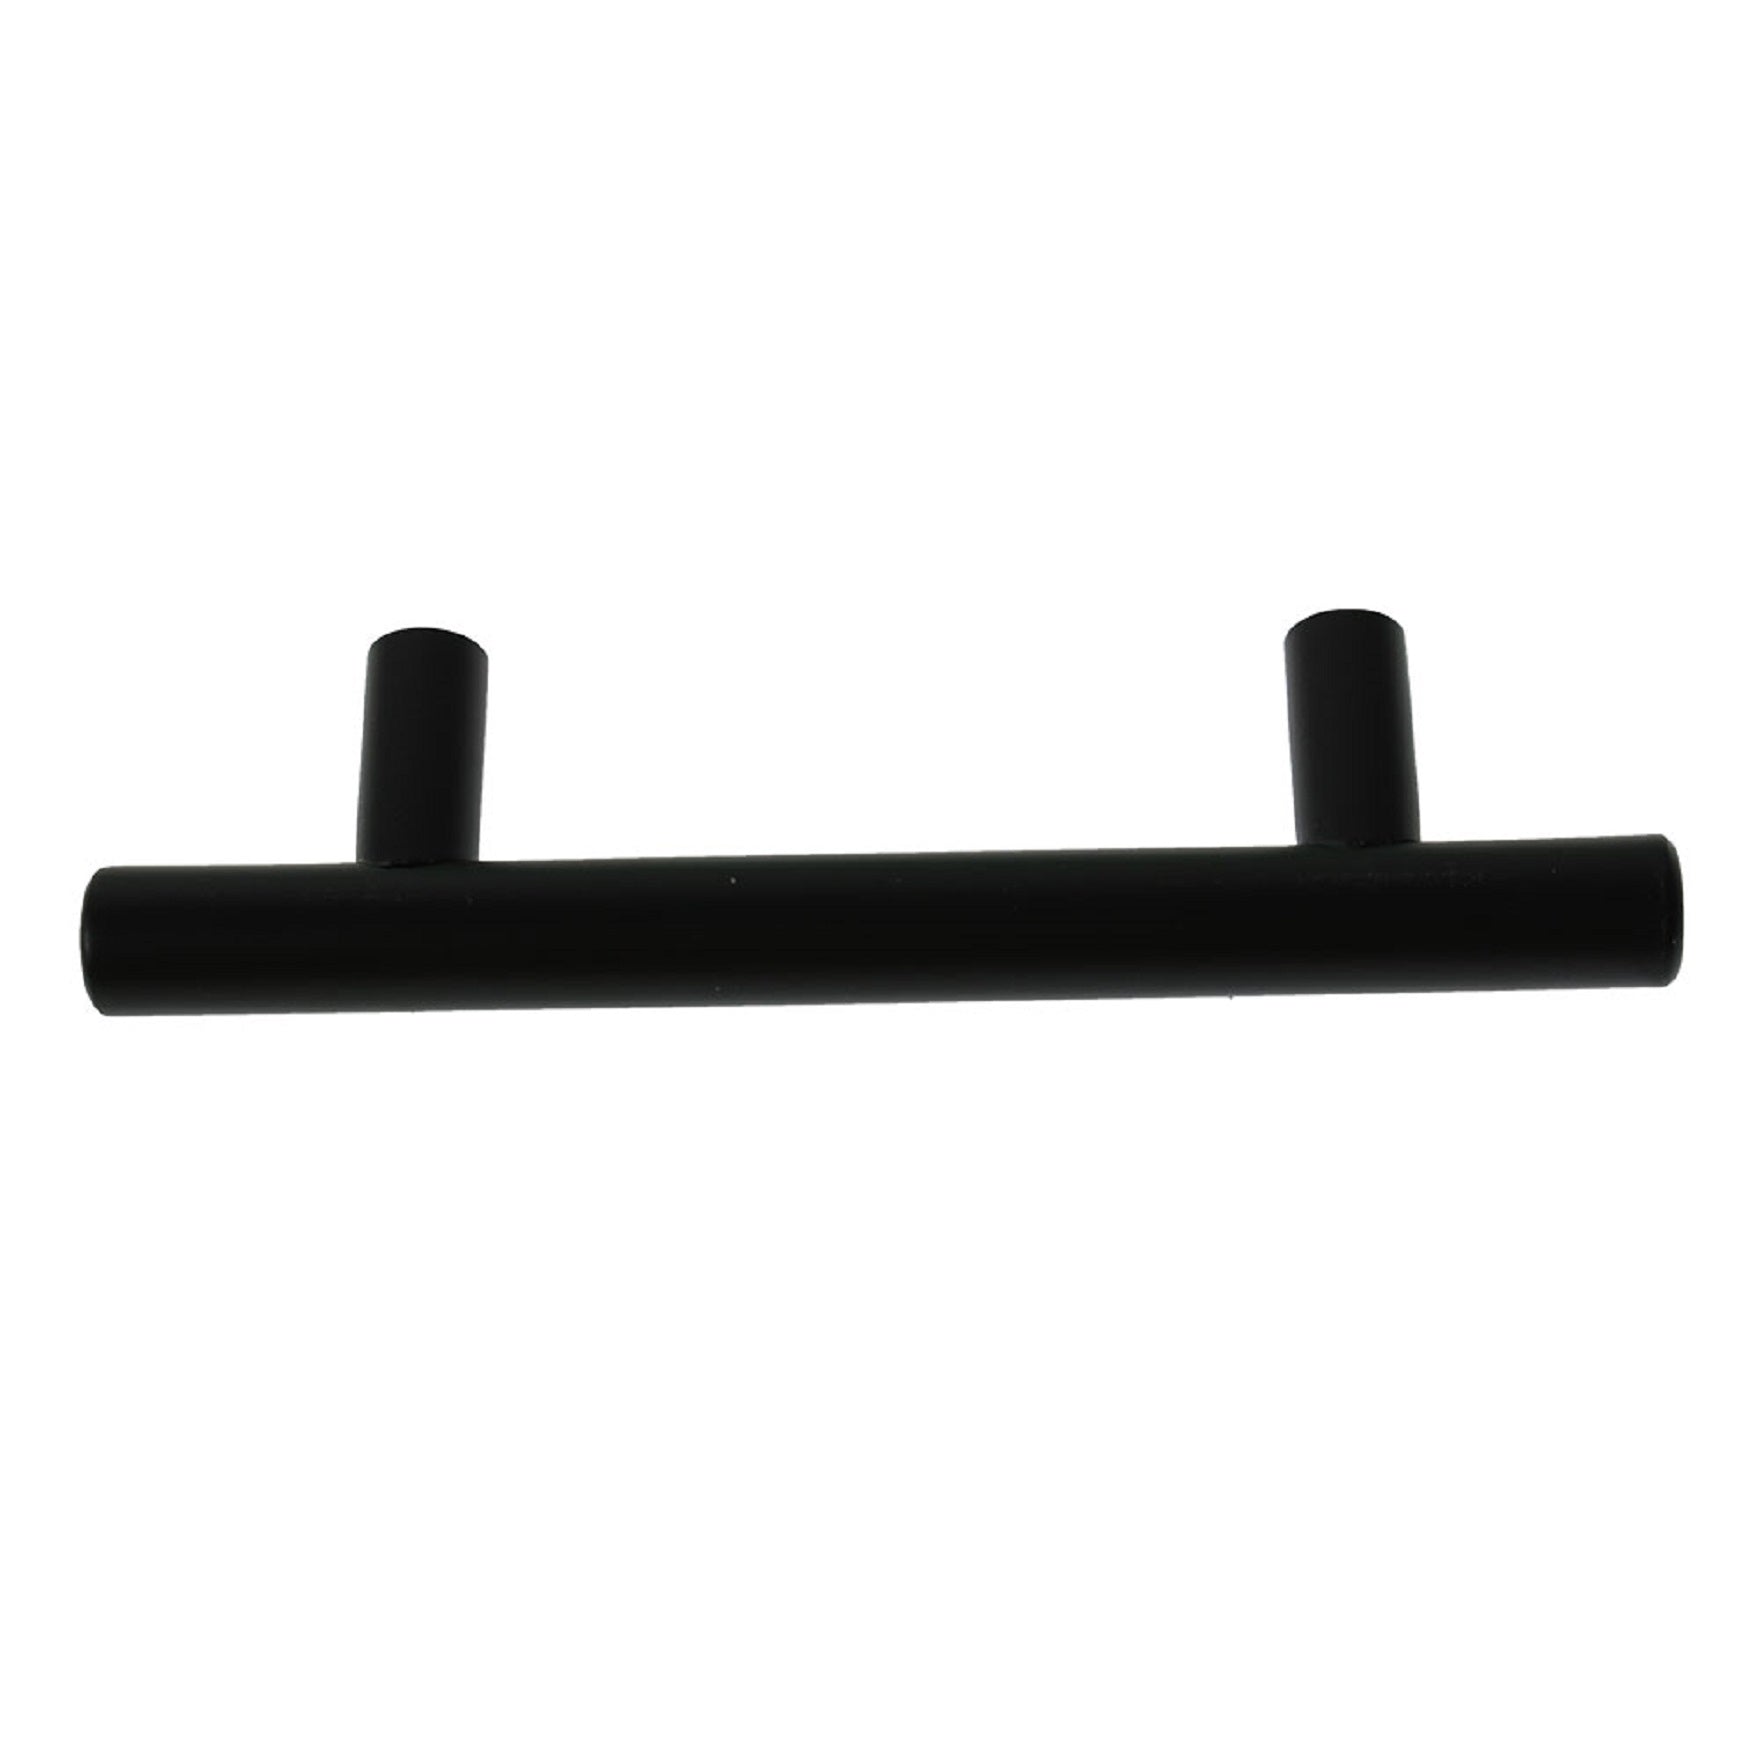 findmall  20 Pack 5 Inch Cabinet Handle Black Stainless Steel Drawer Pulls Cabinet Pulls Bar Kitchen Handles 3 Inch Hole Center FINDMALLPARTS